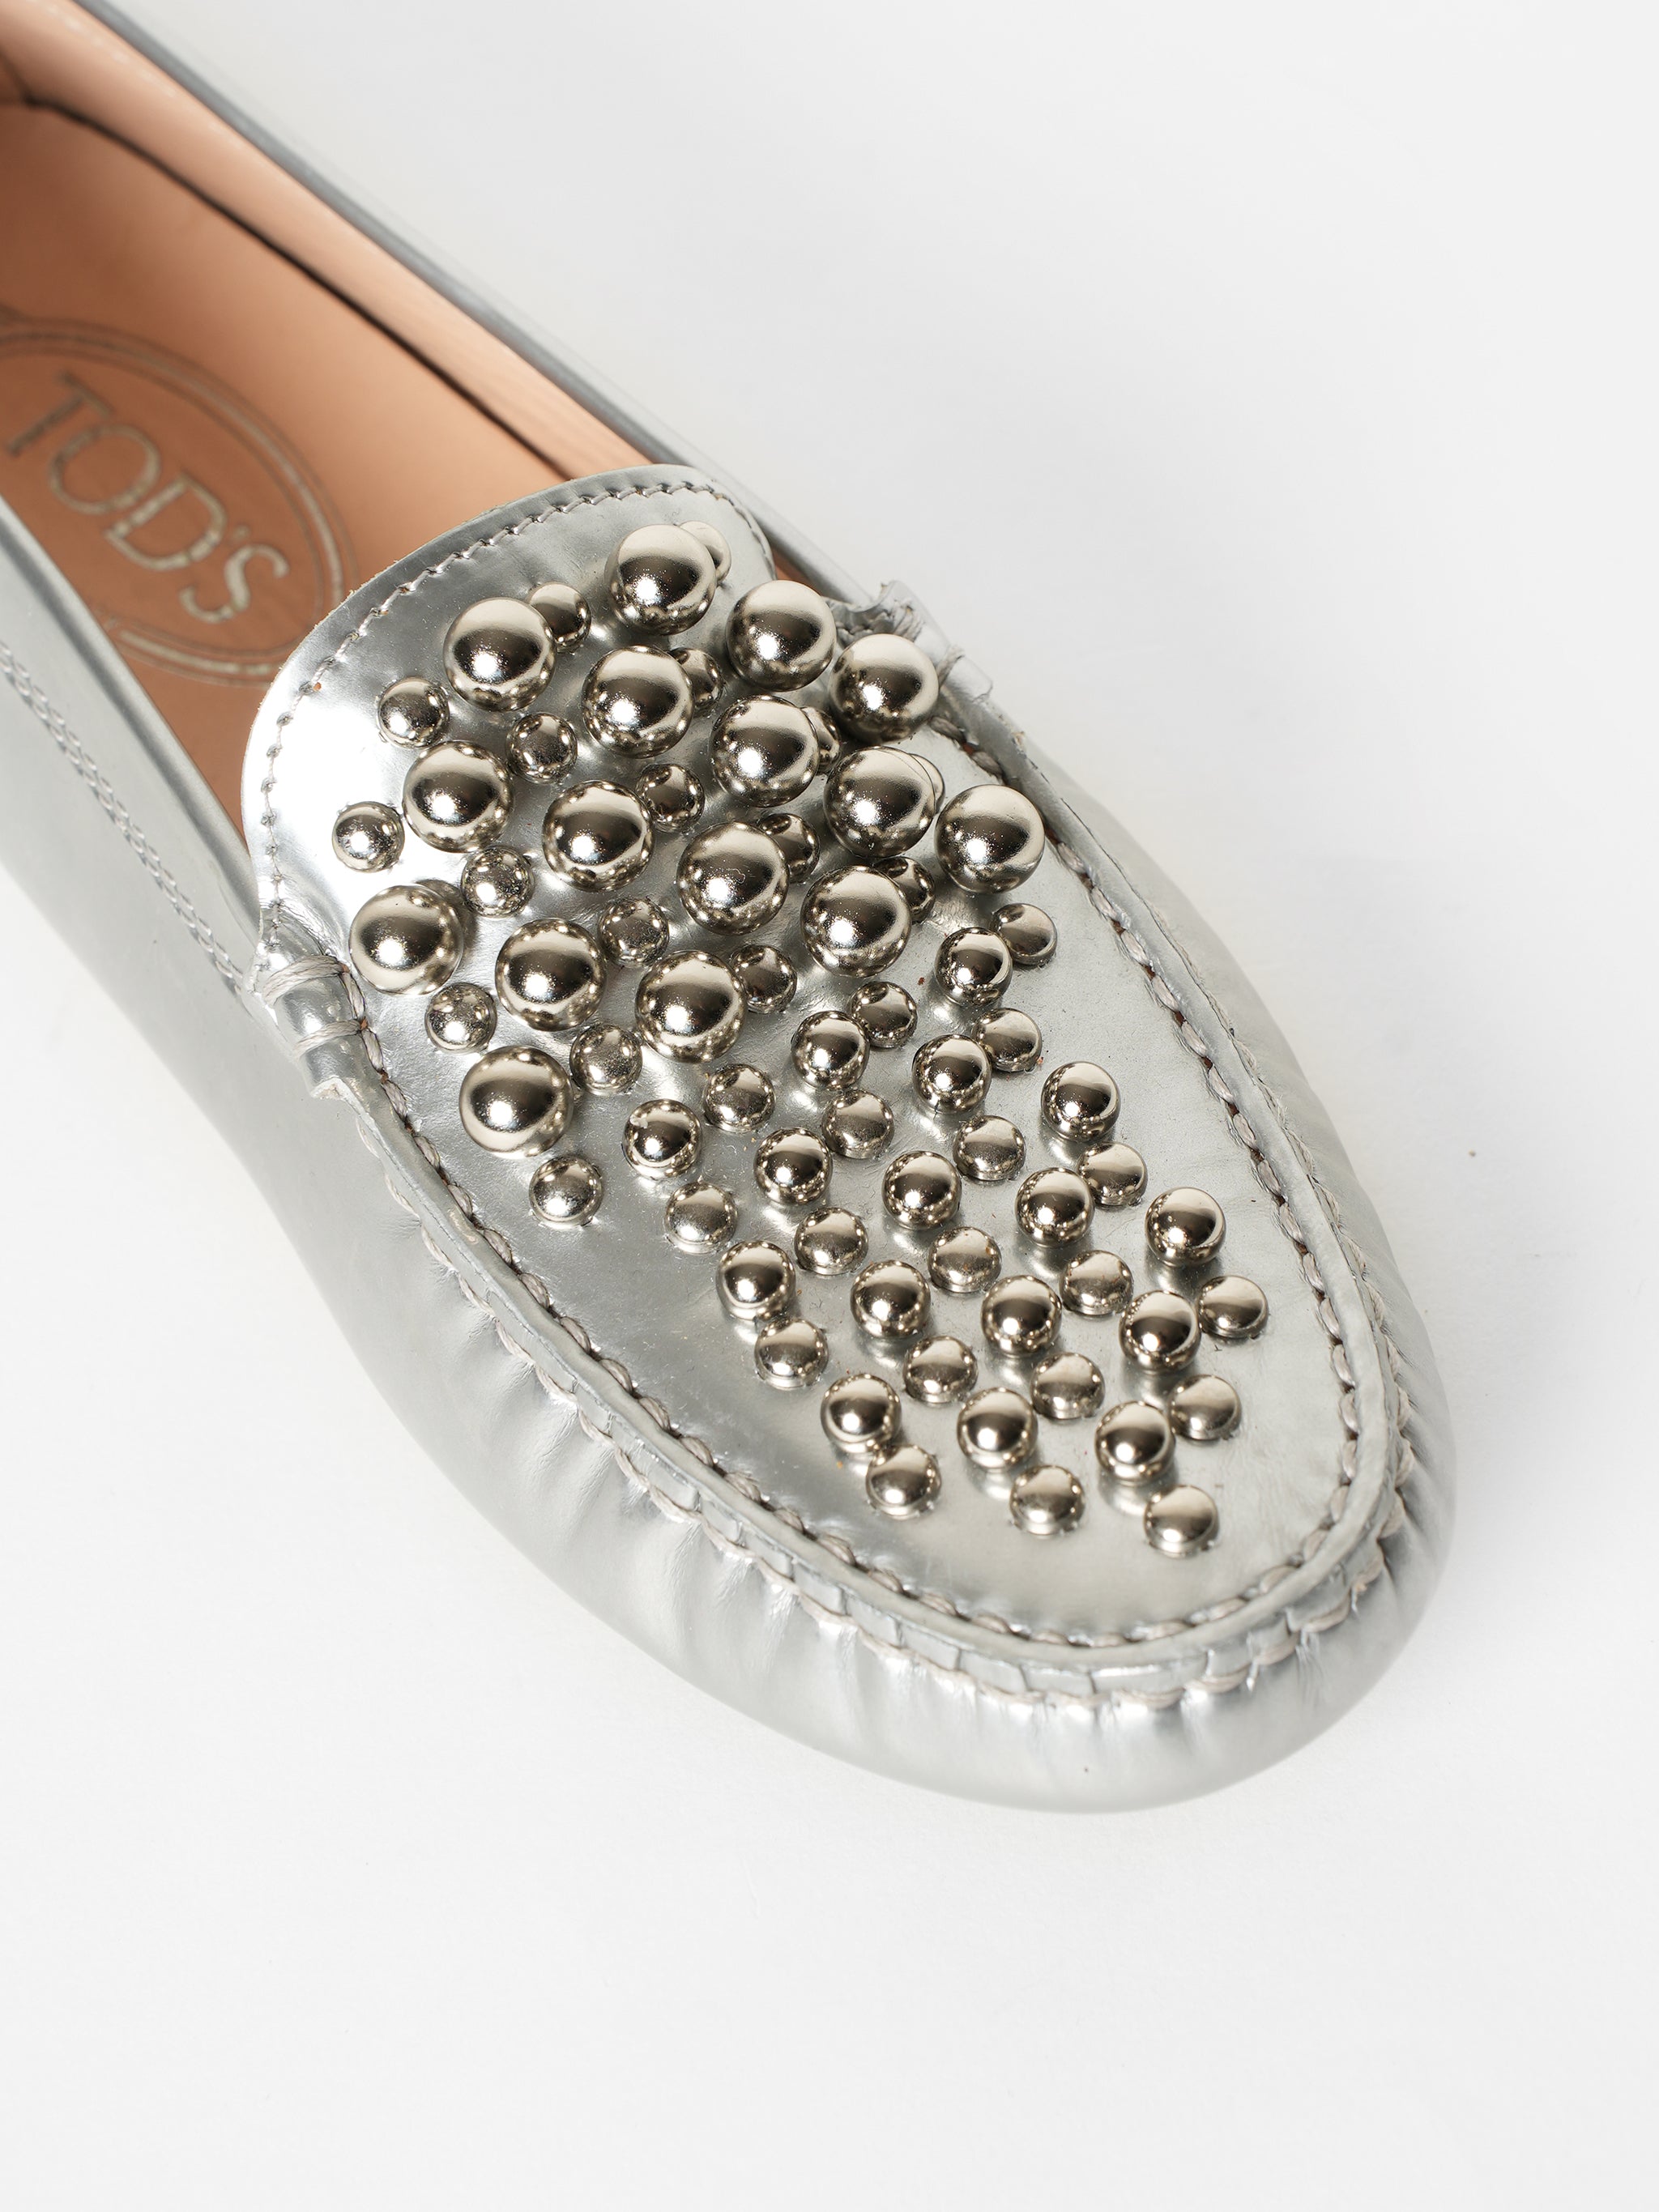 New Tod's Silver Studded Loafers